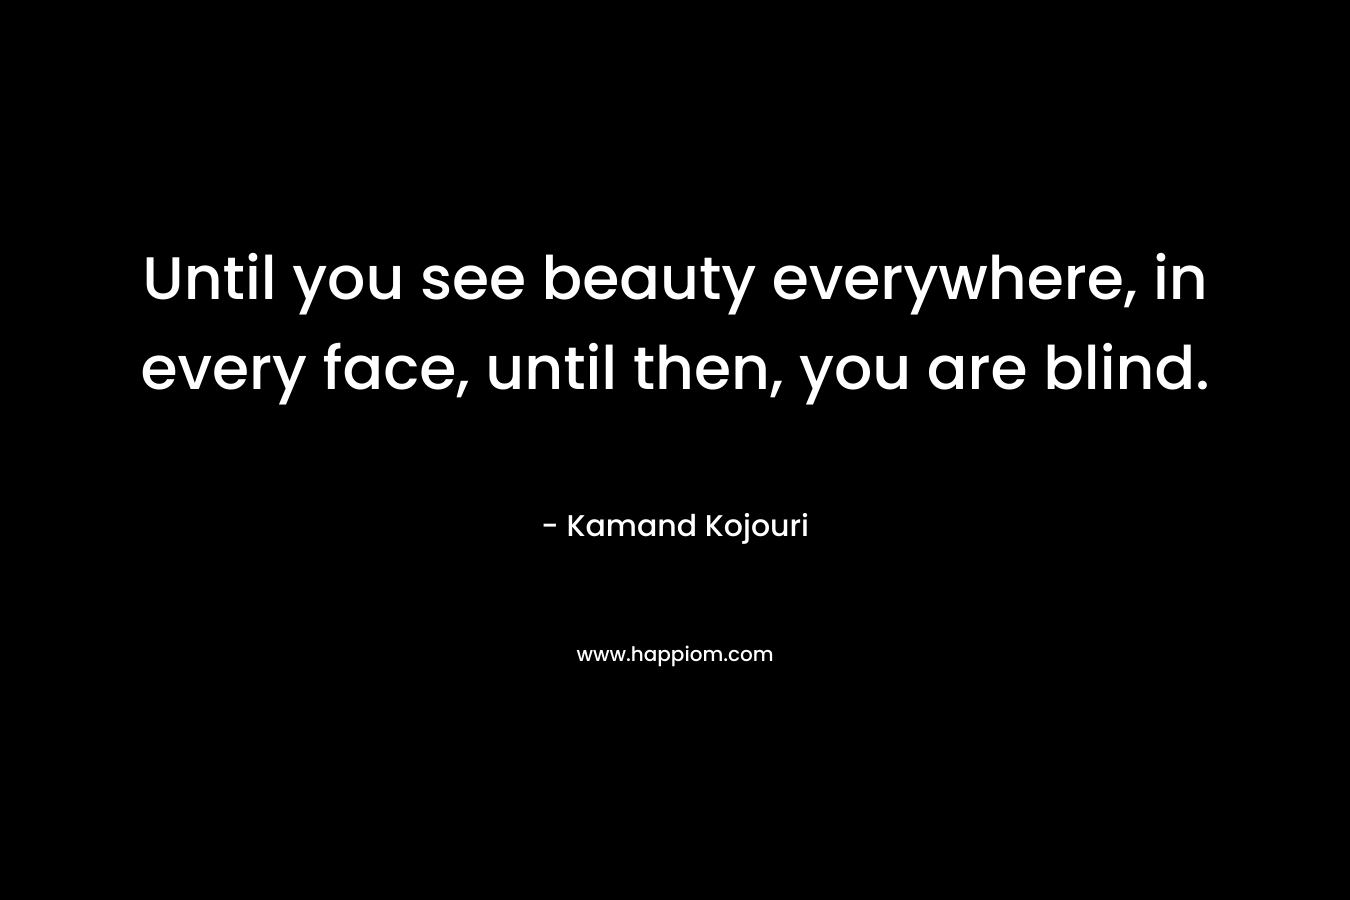 Until you see beauty everywhere, in every face, until then, you are blind.